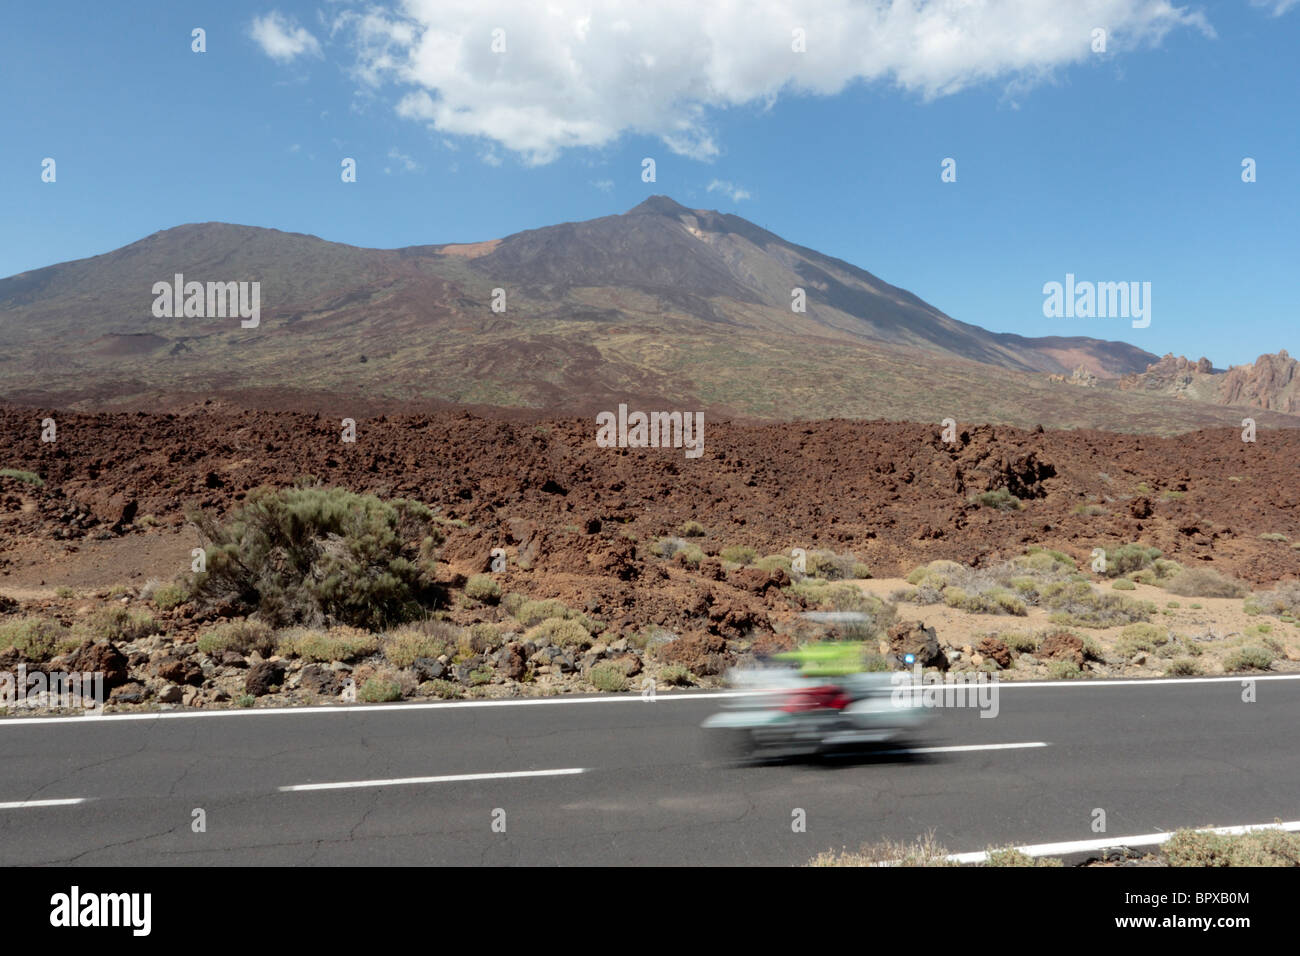 A Guardia Civil Trafico motorcyclist zooms past Teide in the Las Canadas del Teide National Park in Tenerife Canary Islands Stock Photo